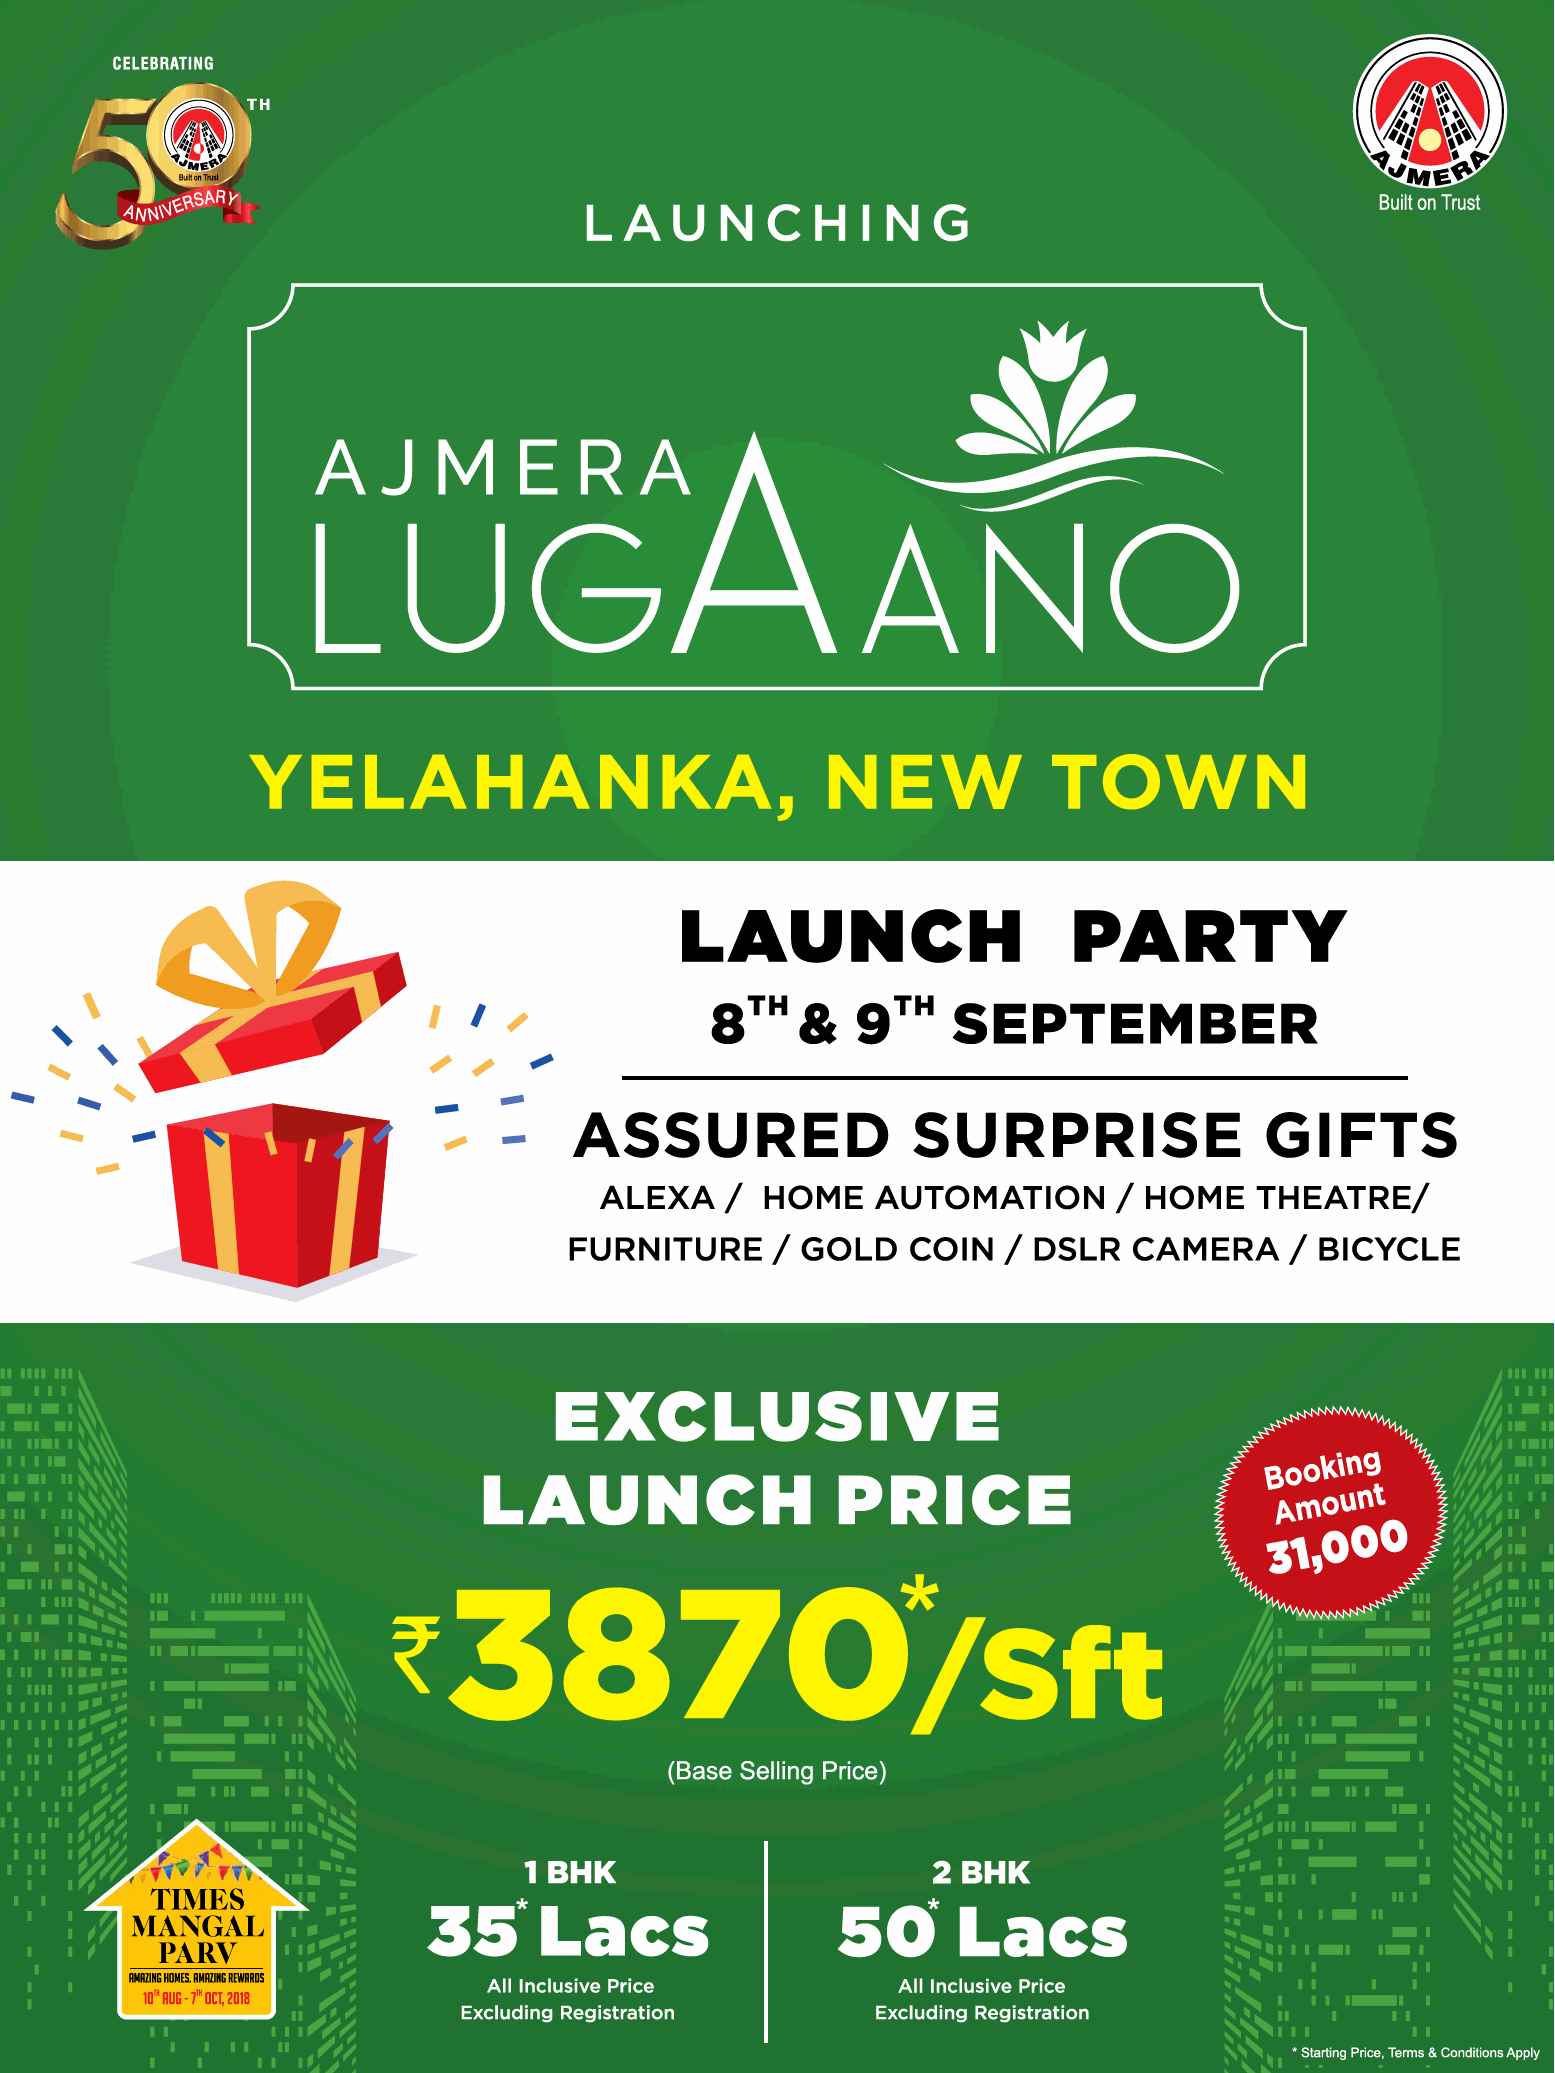 Avail exclusive launch price of Rs. 3870 per sqft at Ajmera Lugaano in Bangalore